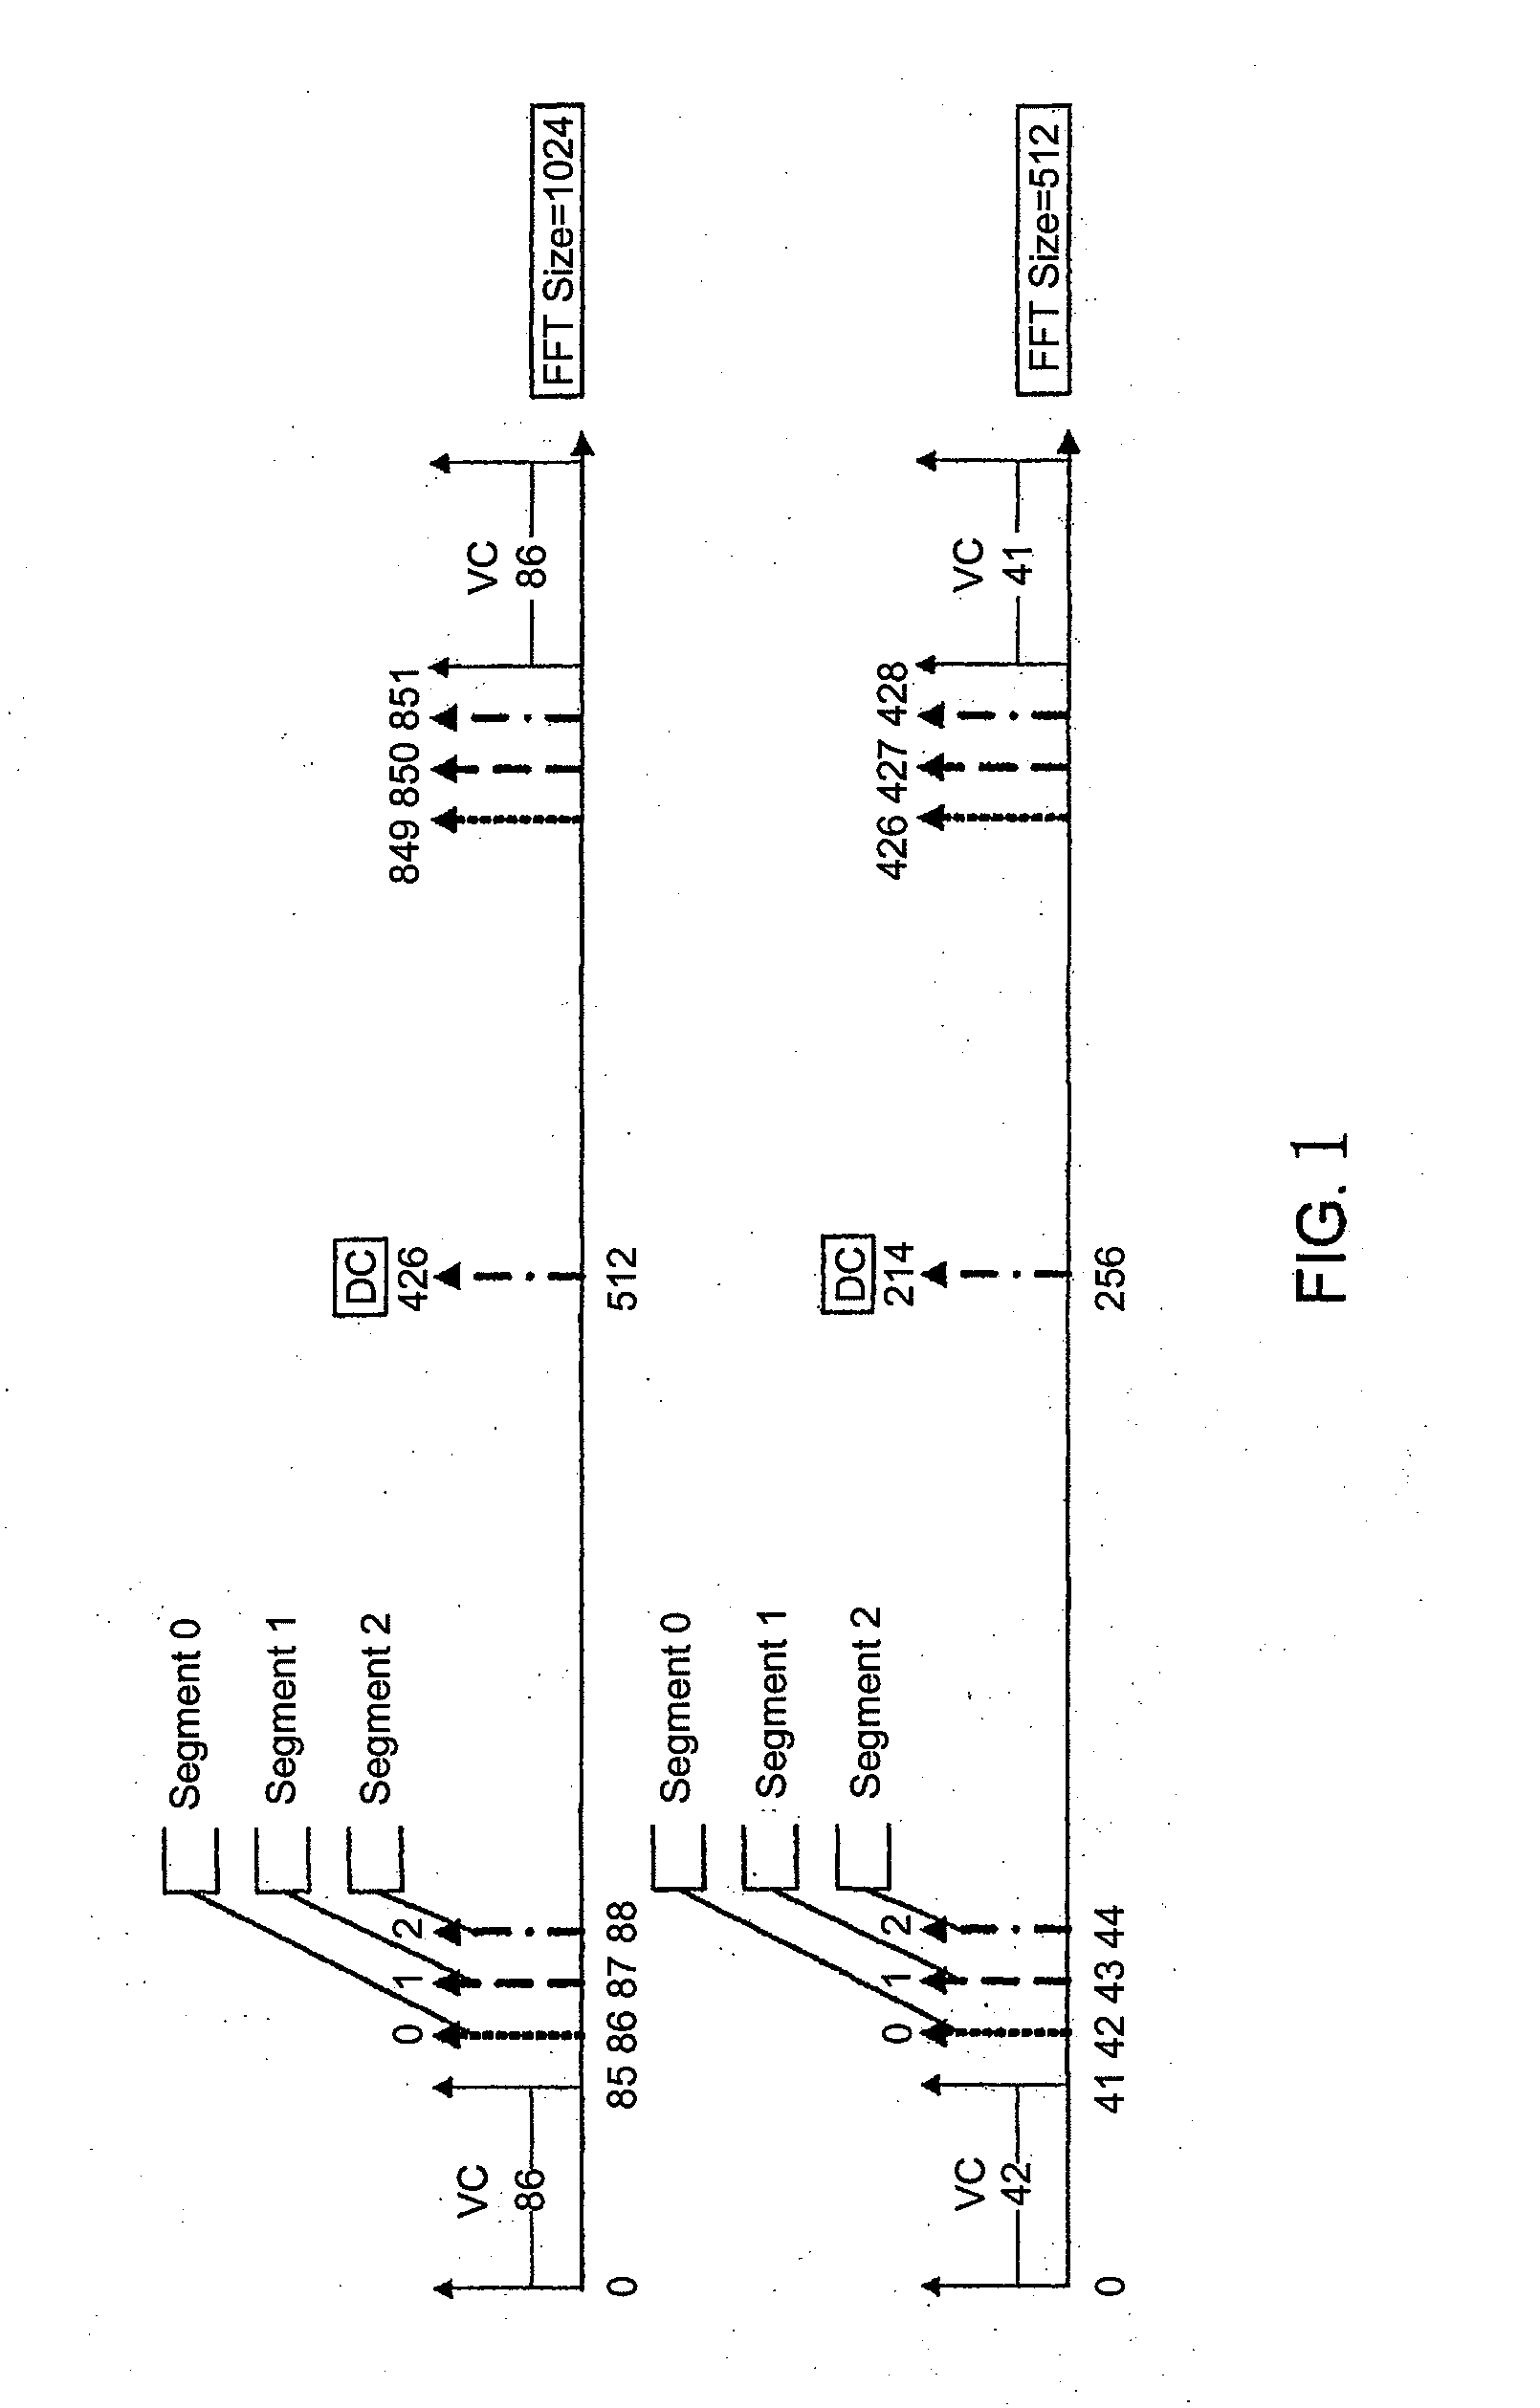 Apparatus and method for preamble detection and integer carrier frequency offset estimation